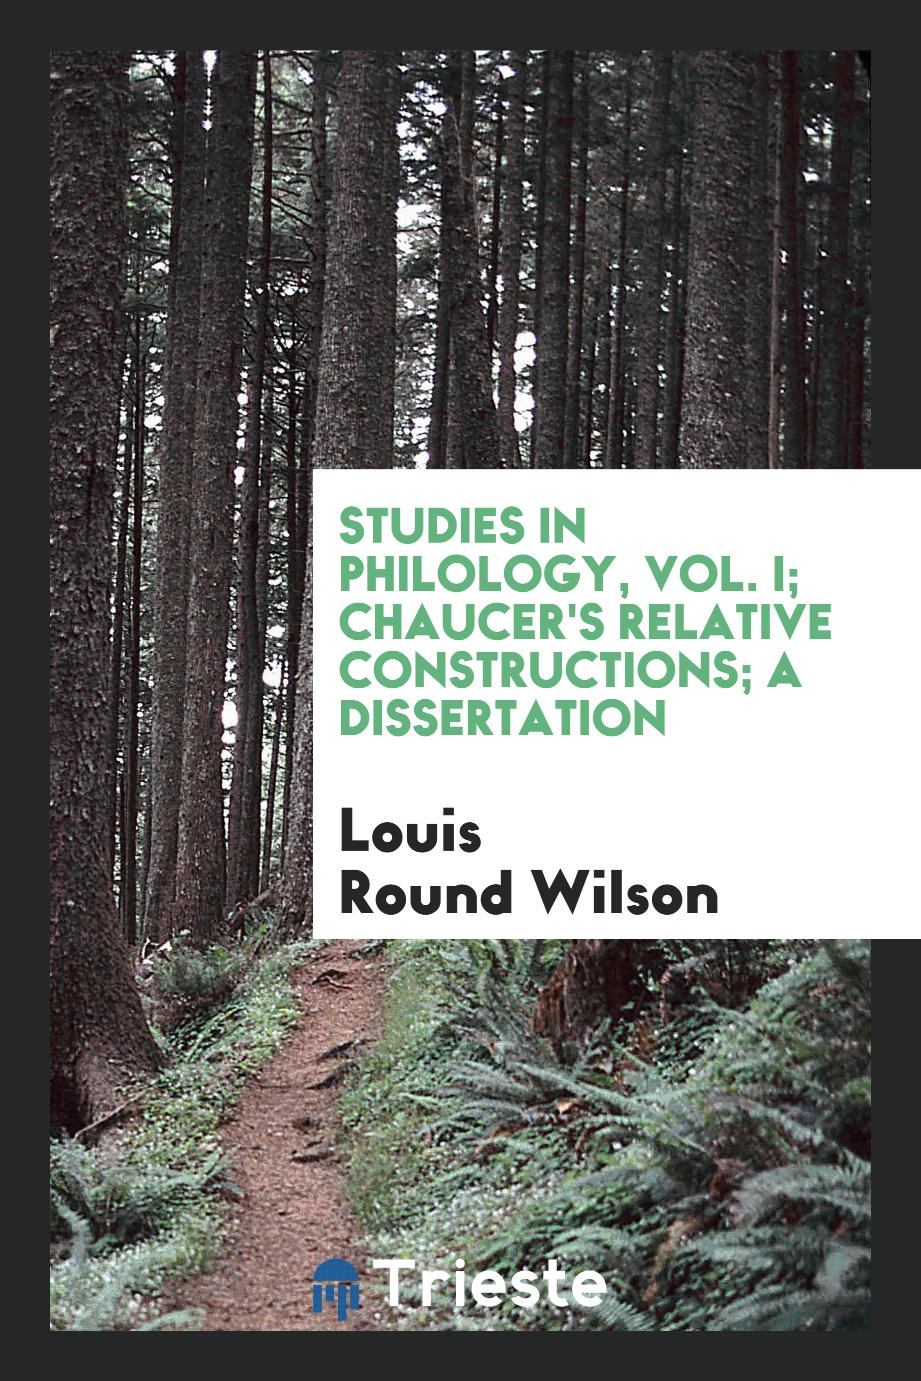 Studies in philology, Vol. I; Chaucer's Relative Constructions; a dissertation